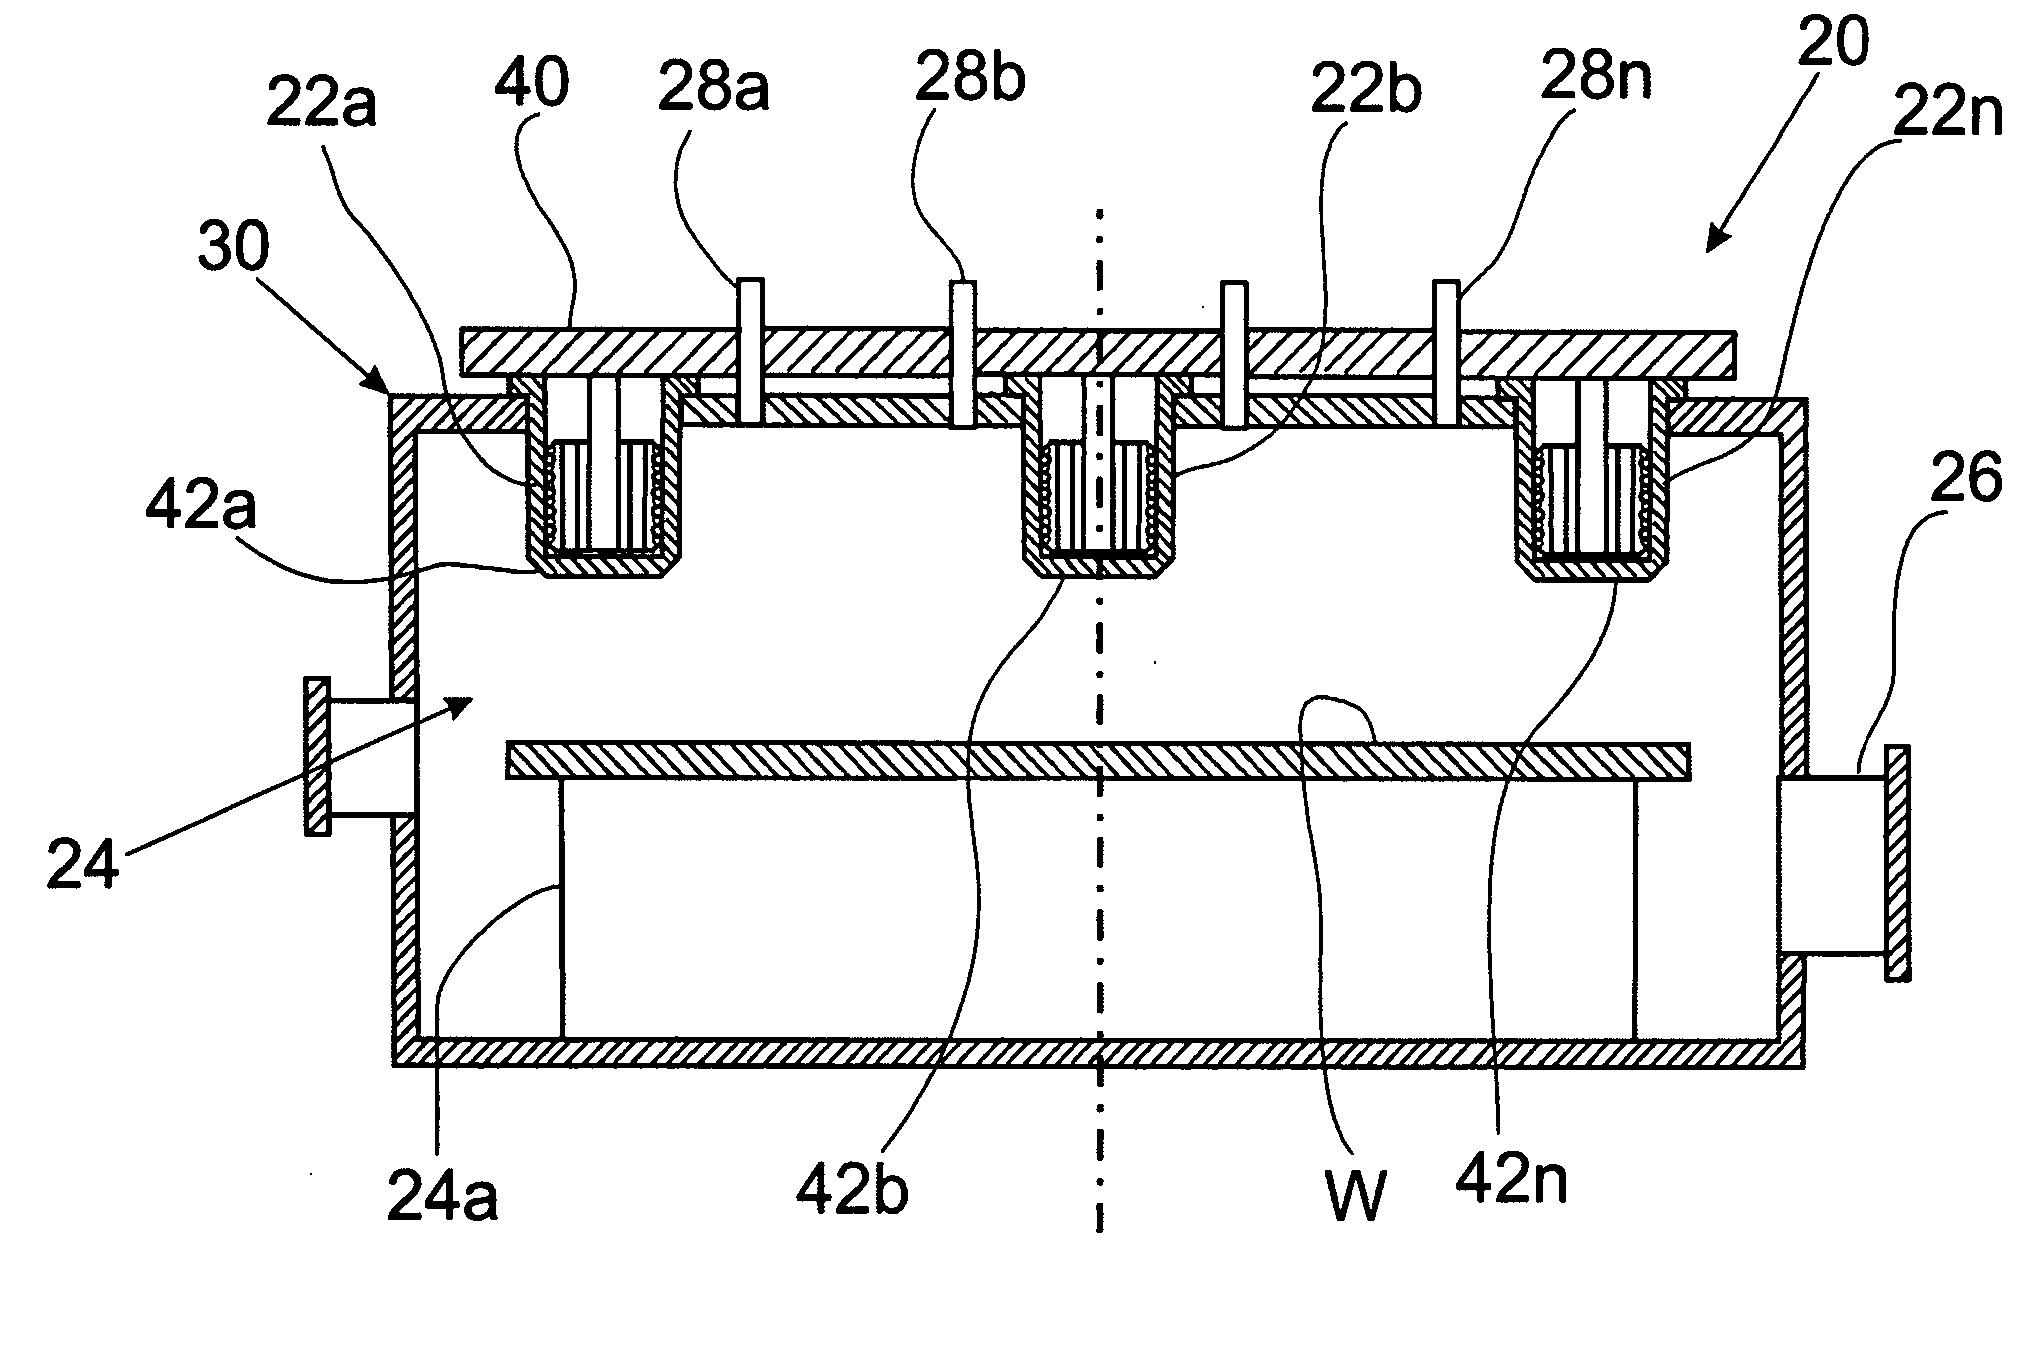 Plasma reactor with inductie excitation of plasma and efficient removal of heat from the excitation coil